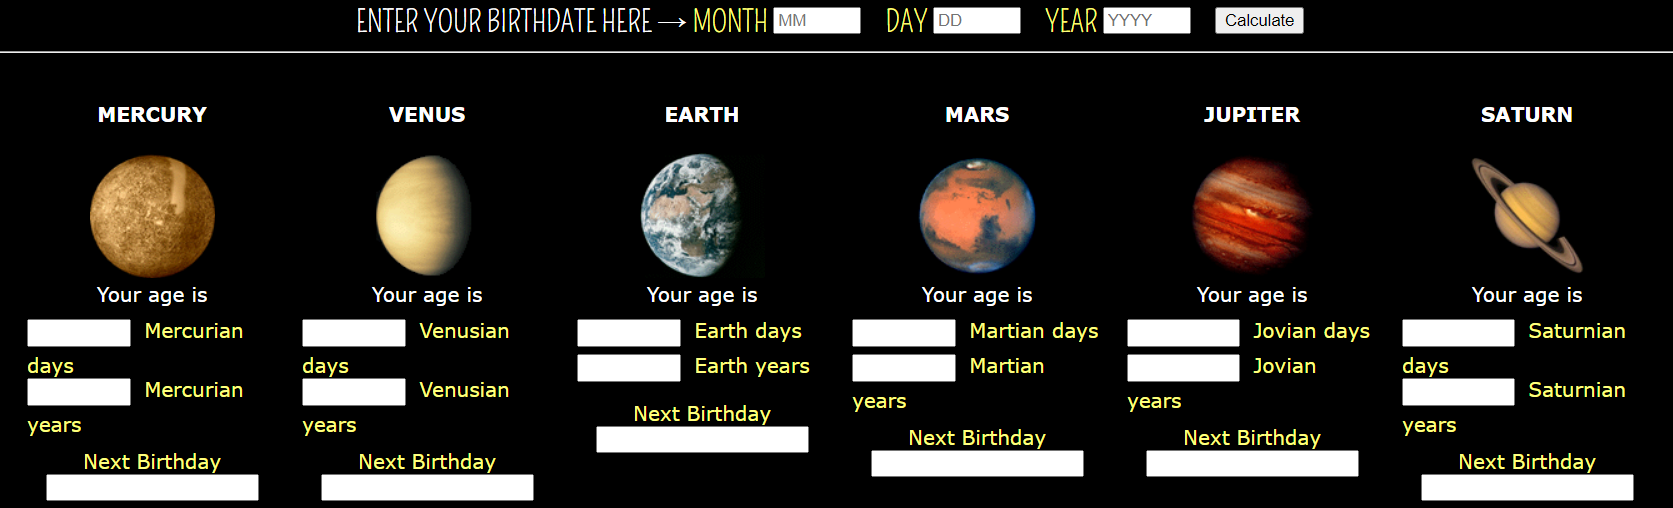 your age on other planets 